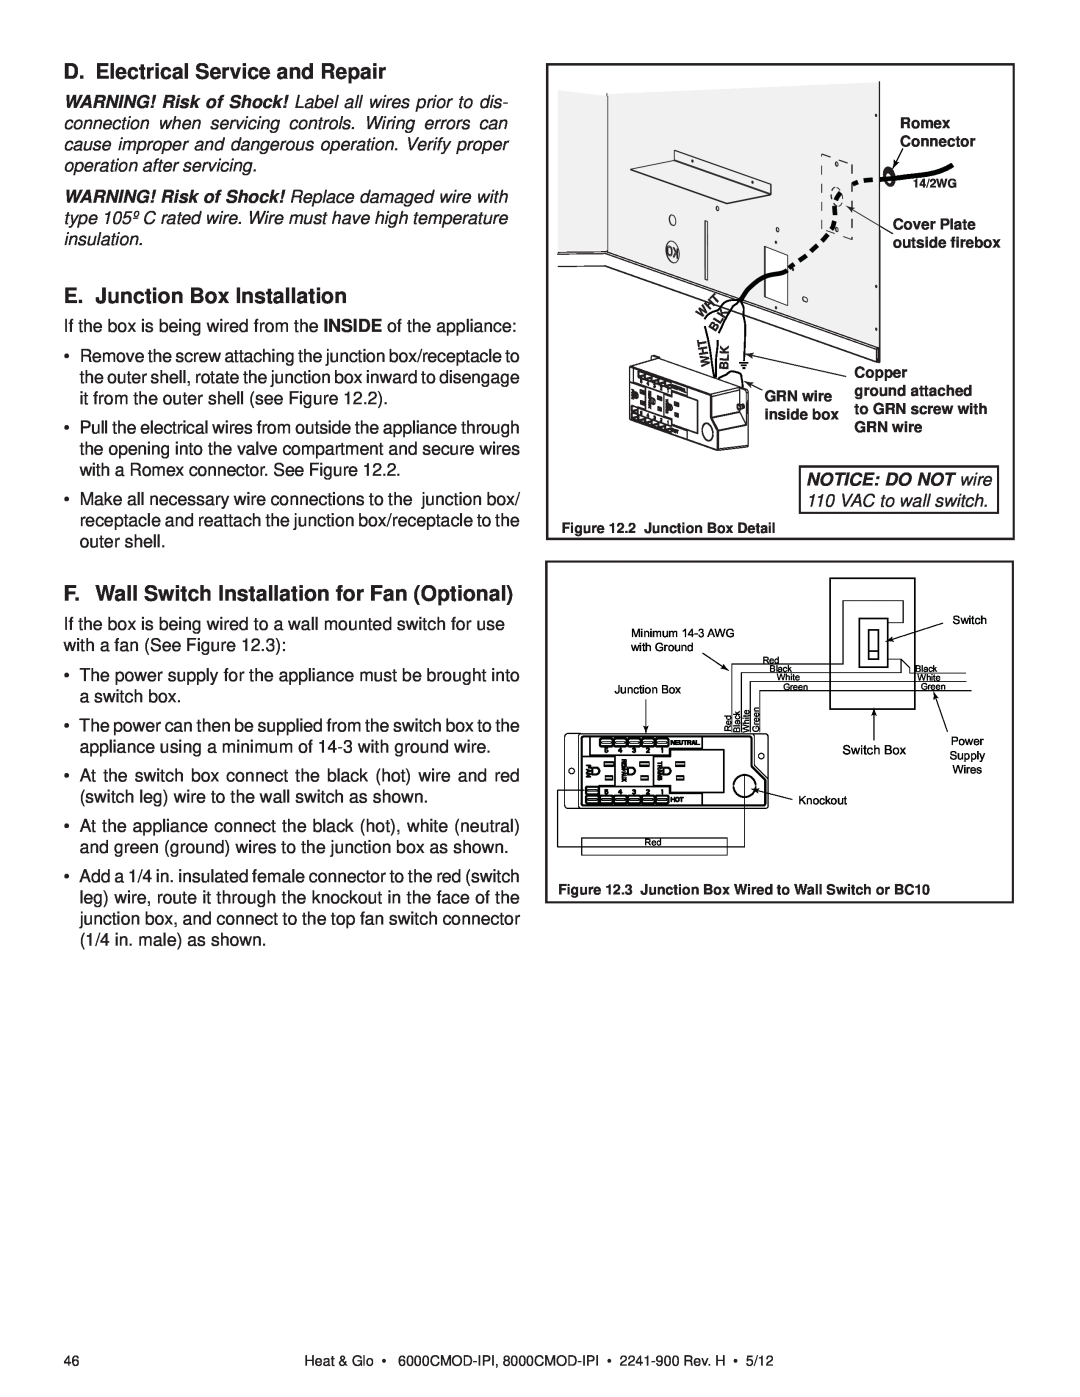 Heat & Glo LifeStyle 8000CMOD-IPI D. Electrical Service and Repair, E. Junction Box Installation, NOTICE DO NOT wire 